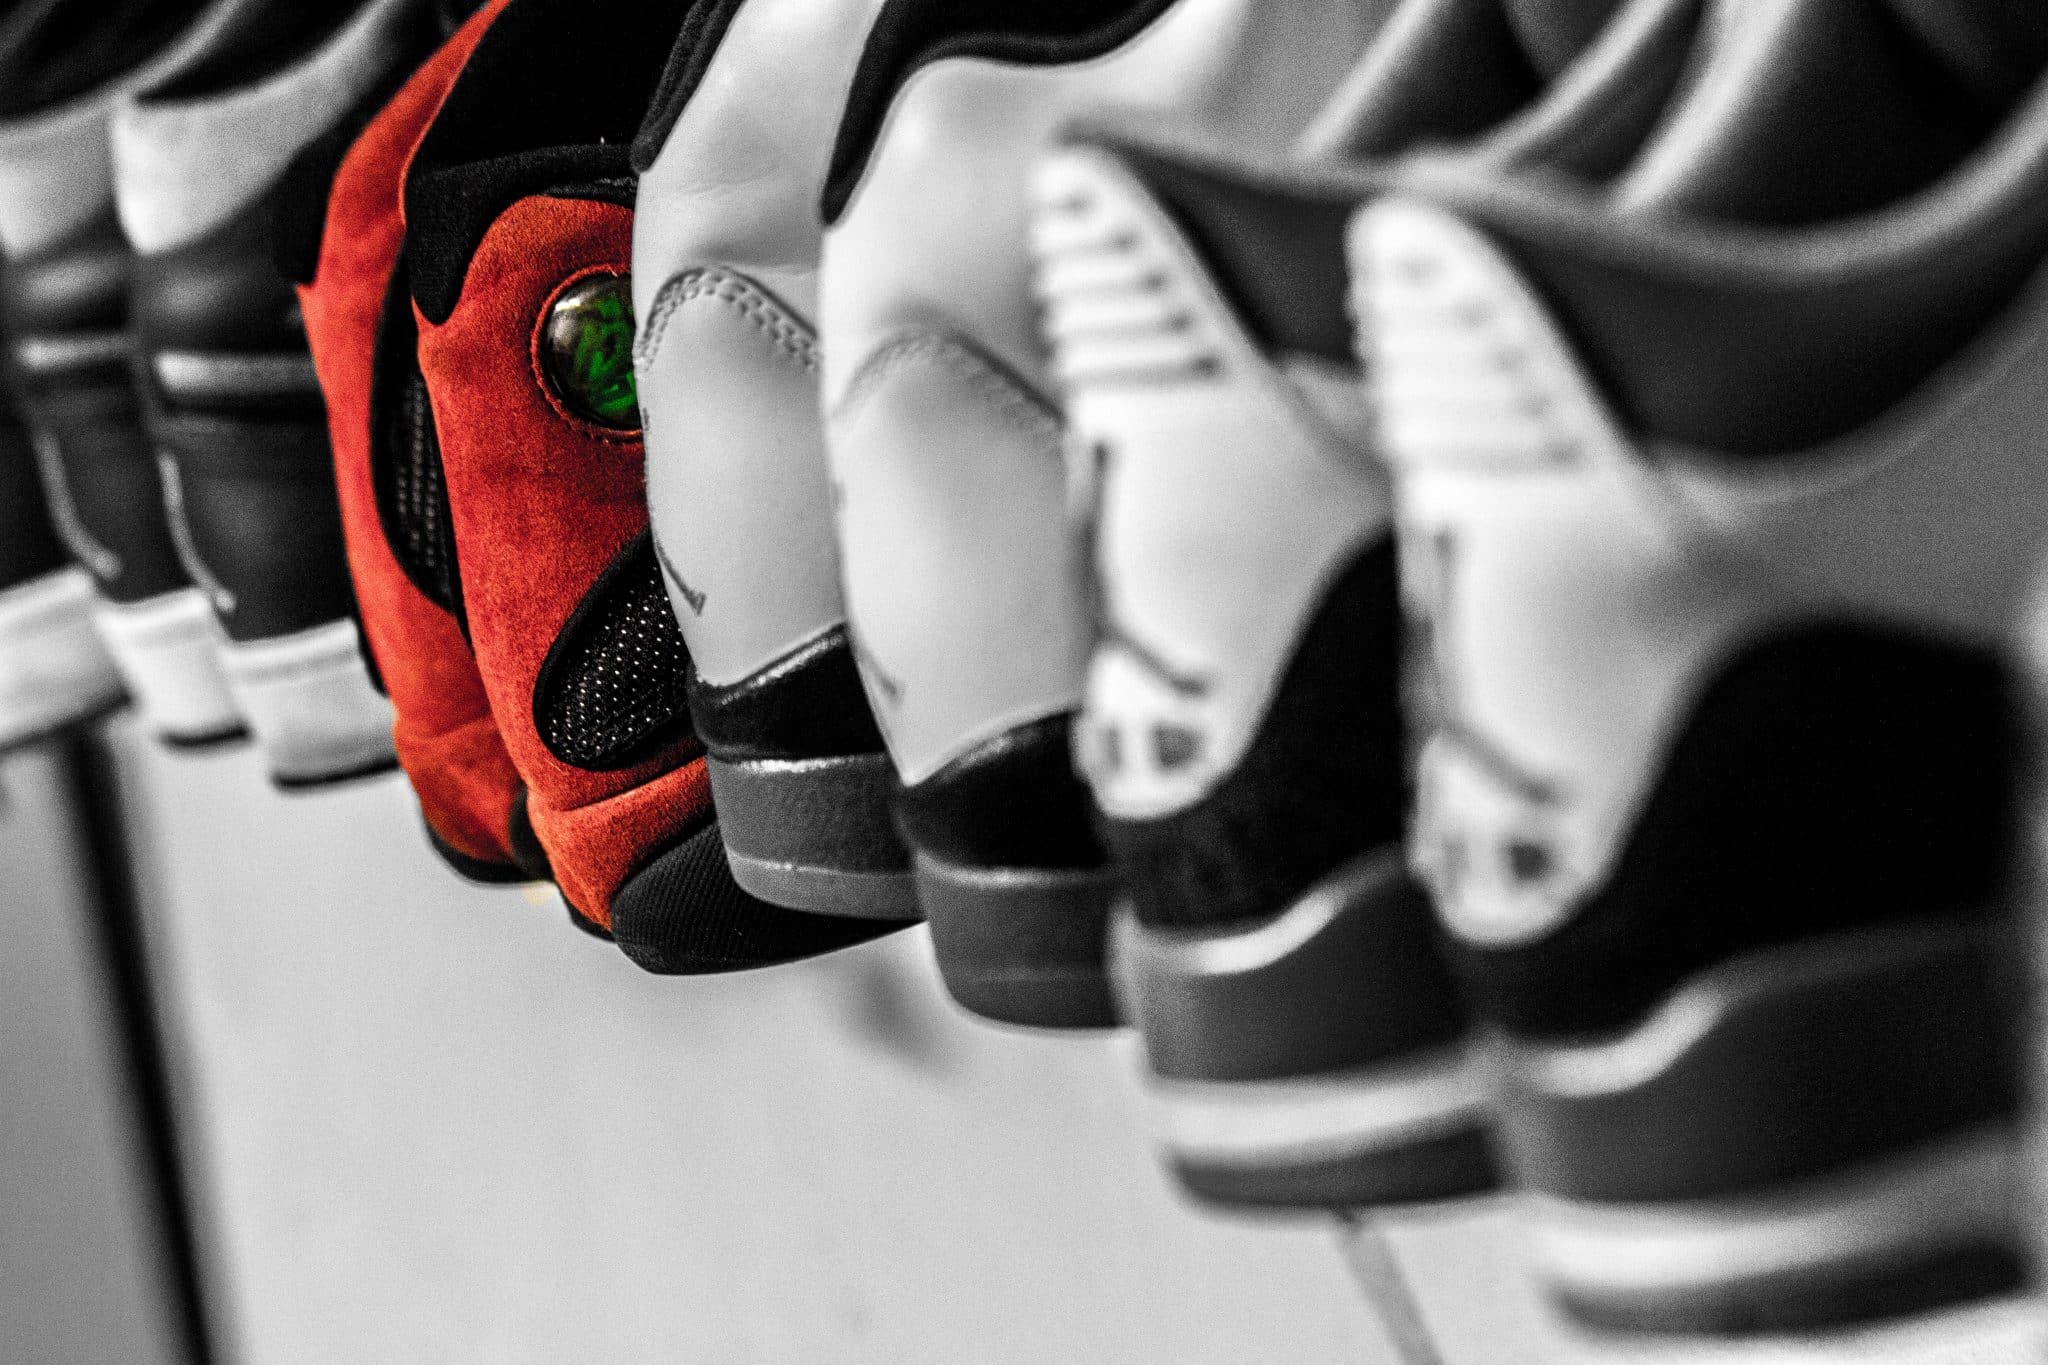 How to store your shoes?